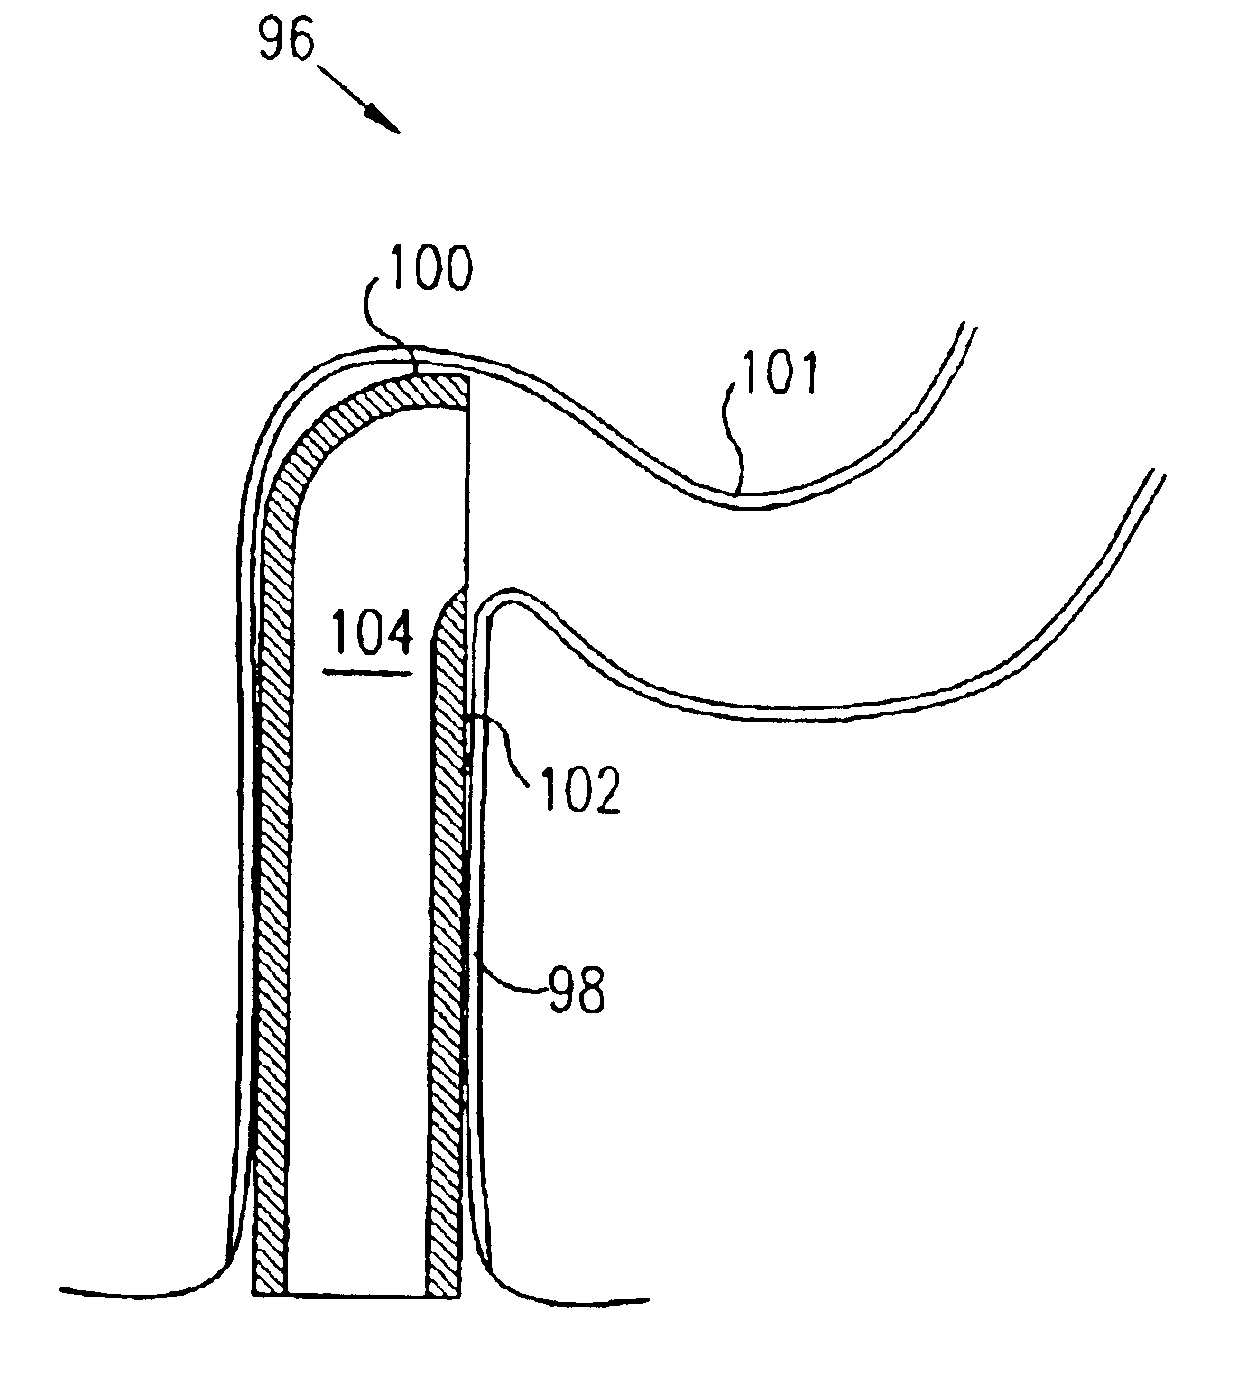 Method for insertion of an endoscope into the colon